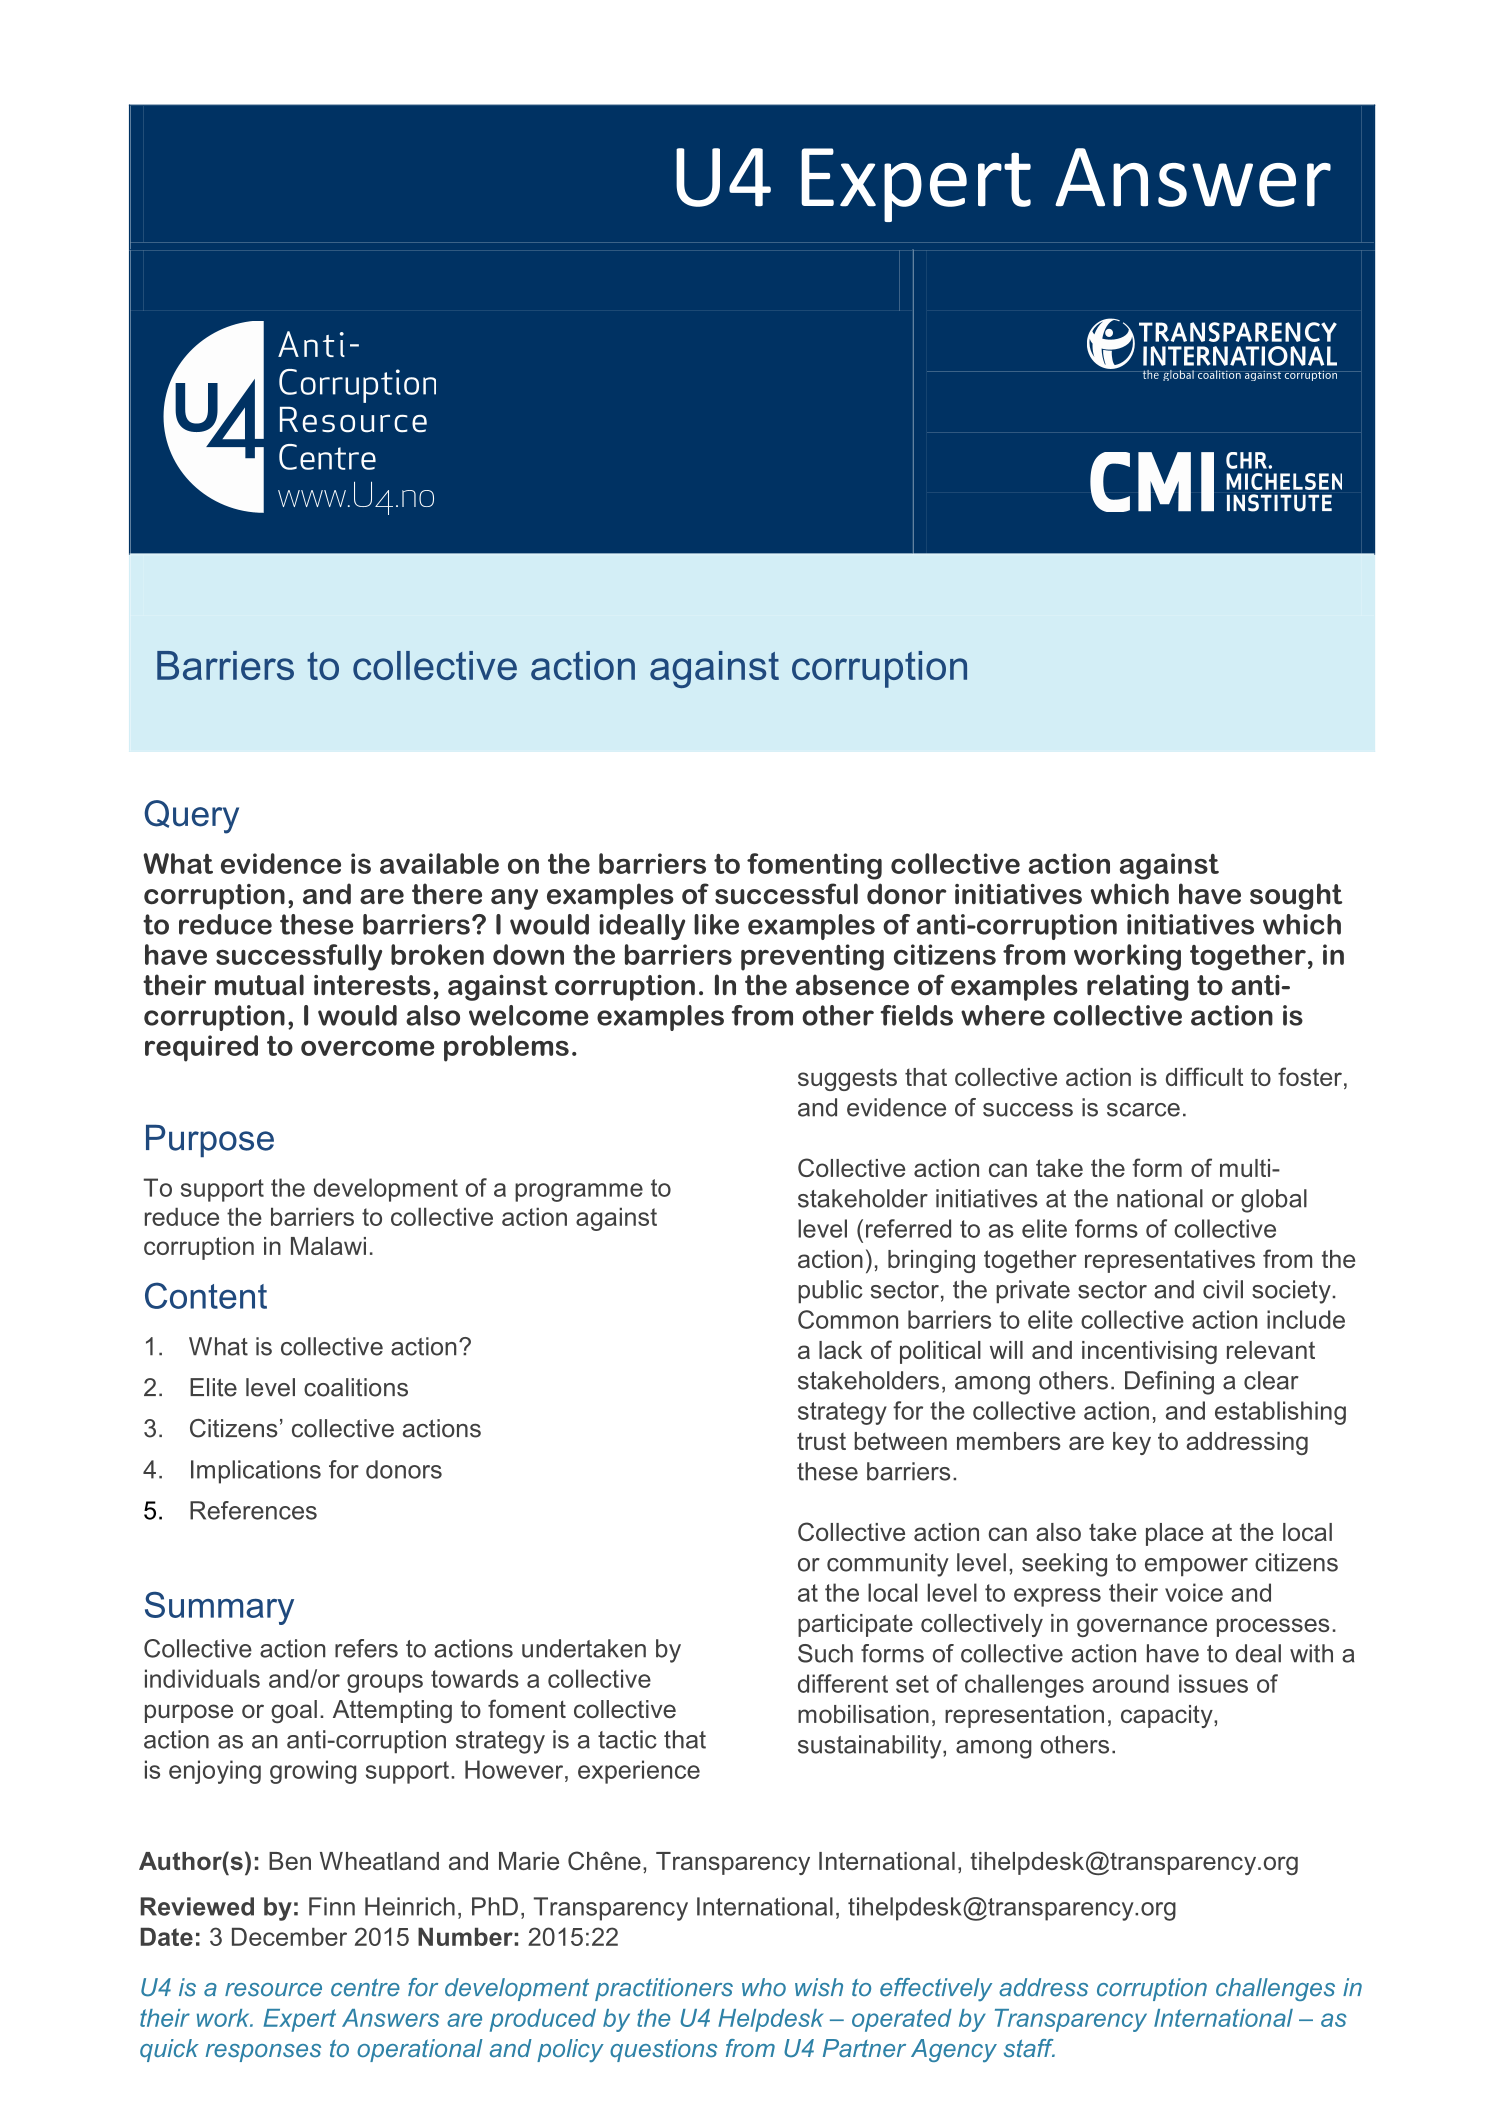 Barriers to collective action against corruption